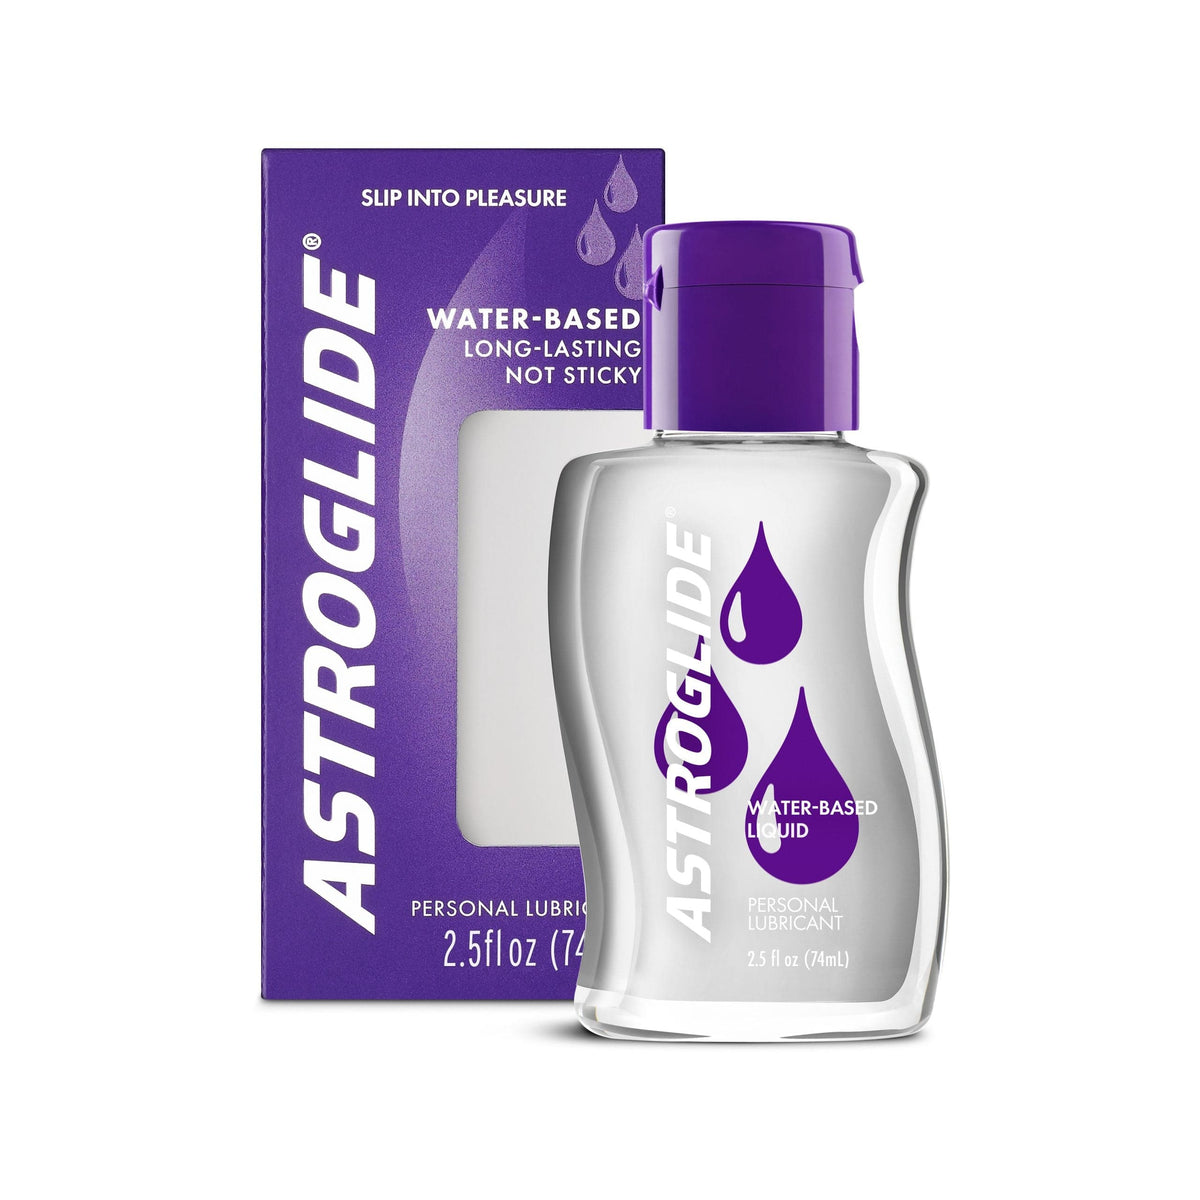 Astroglide - Water Based Liquid Personal Lubricant - 74ml Lube (Water Based) 1230000007382 Durio.sg